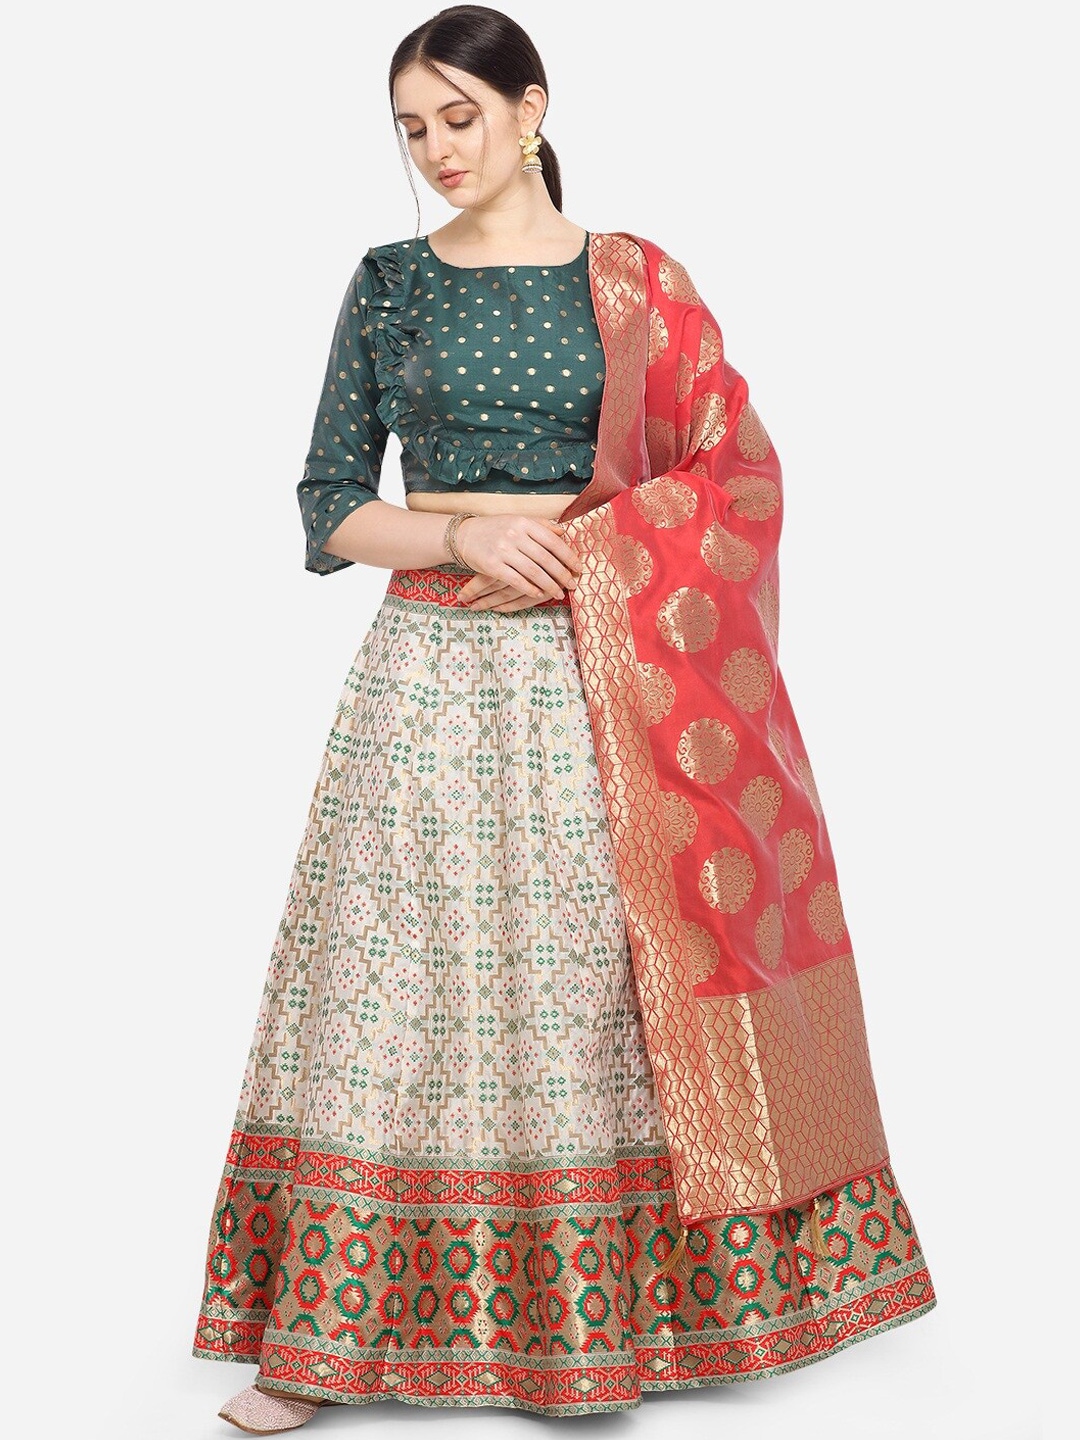 PURVAJA Women White & Green Printed Semi-Stitched Lehenga & Unstitched Blouse with Dupatta Price in India